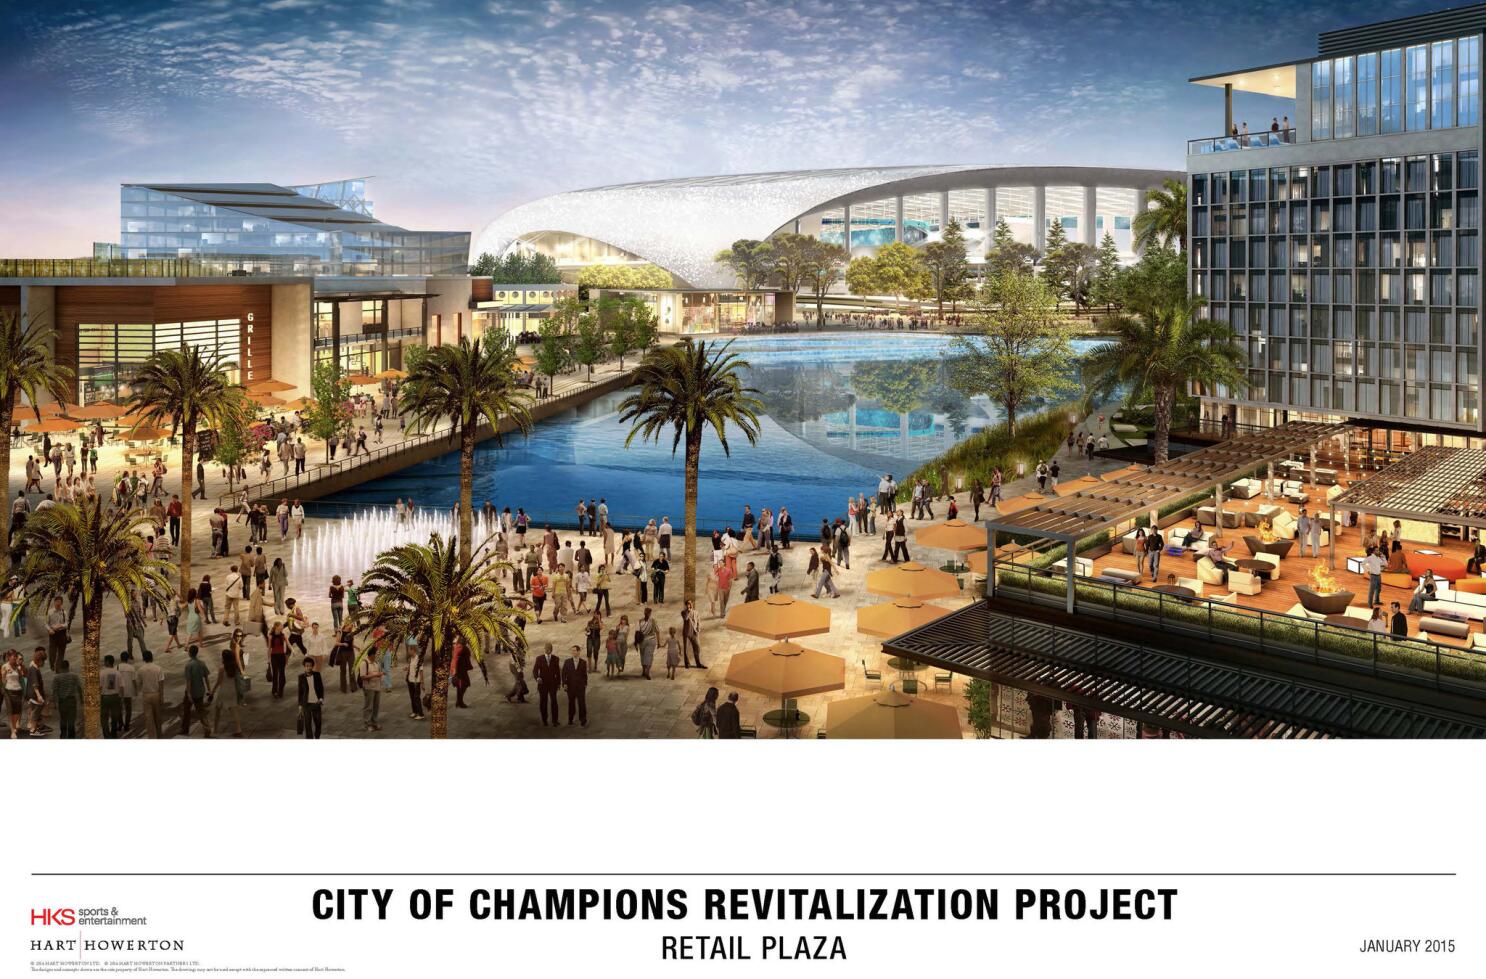 City of Champions Revitalization Project